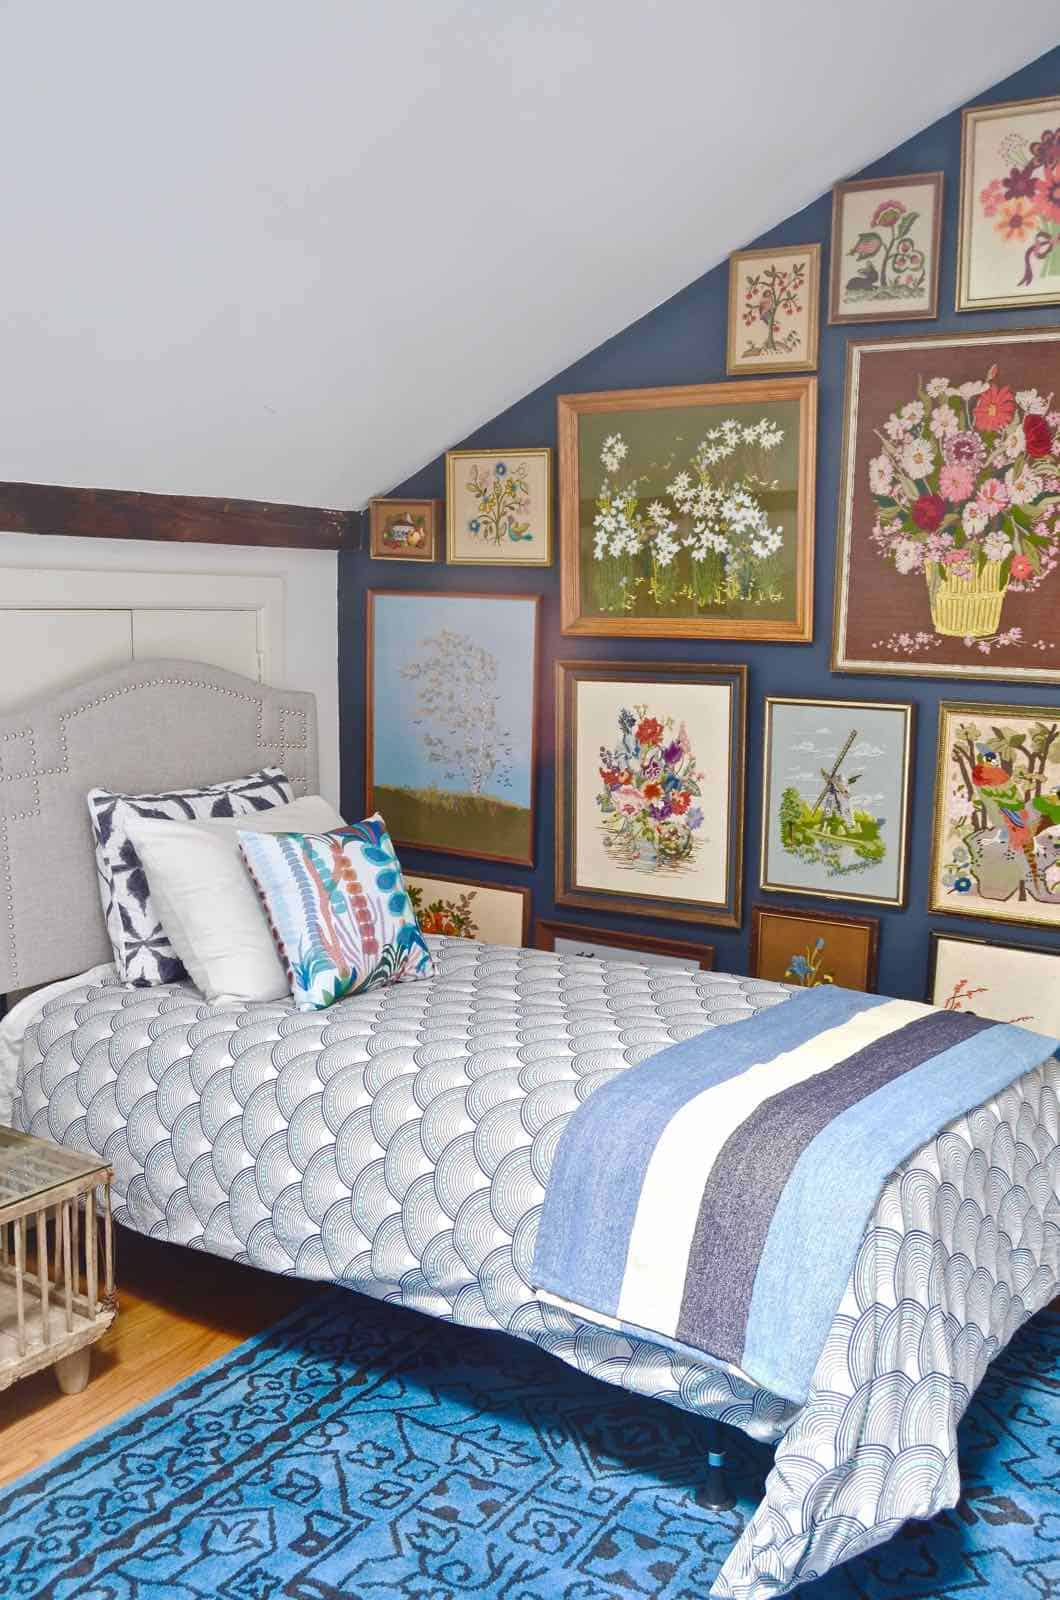 Updated guest room with new upholstered headboards and a repainted rich vintage gallery wall.